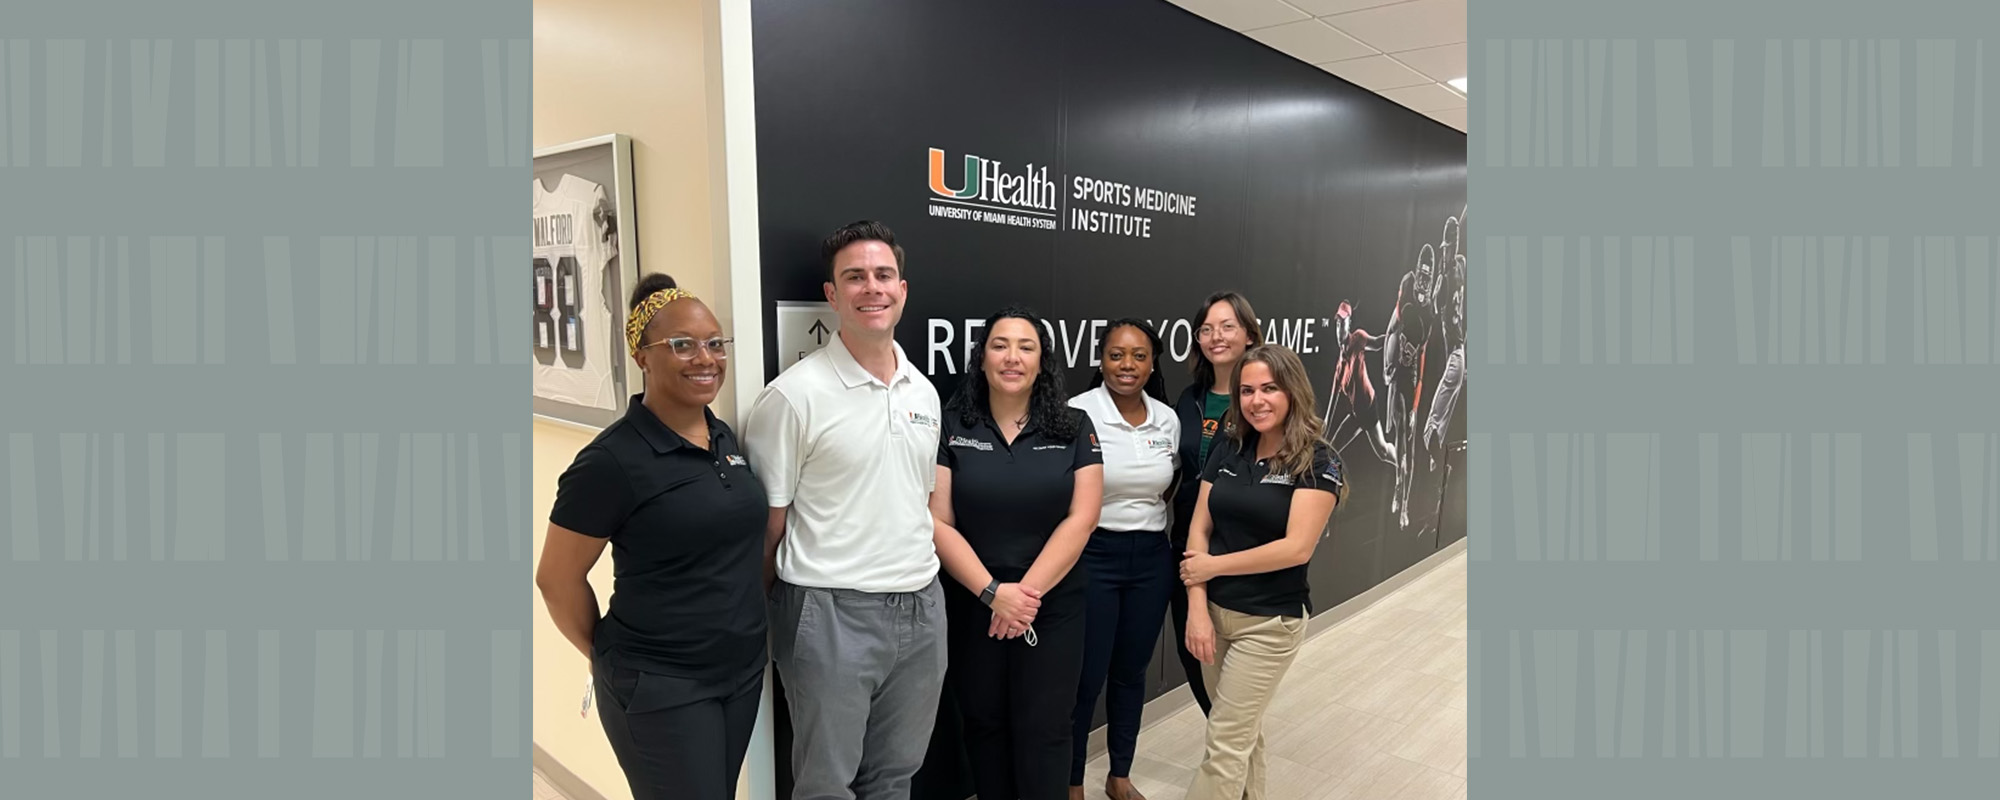 The team of athletic trainers at UM's Sports Medicine Institute gathered in front of hallways sign.